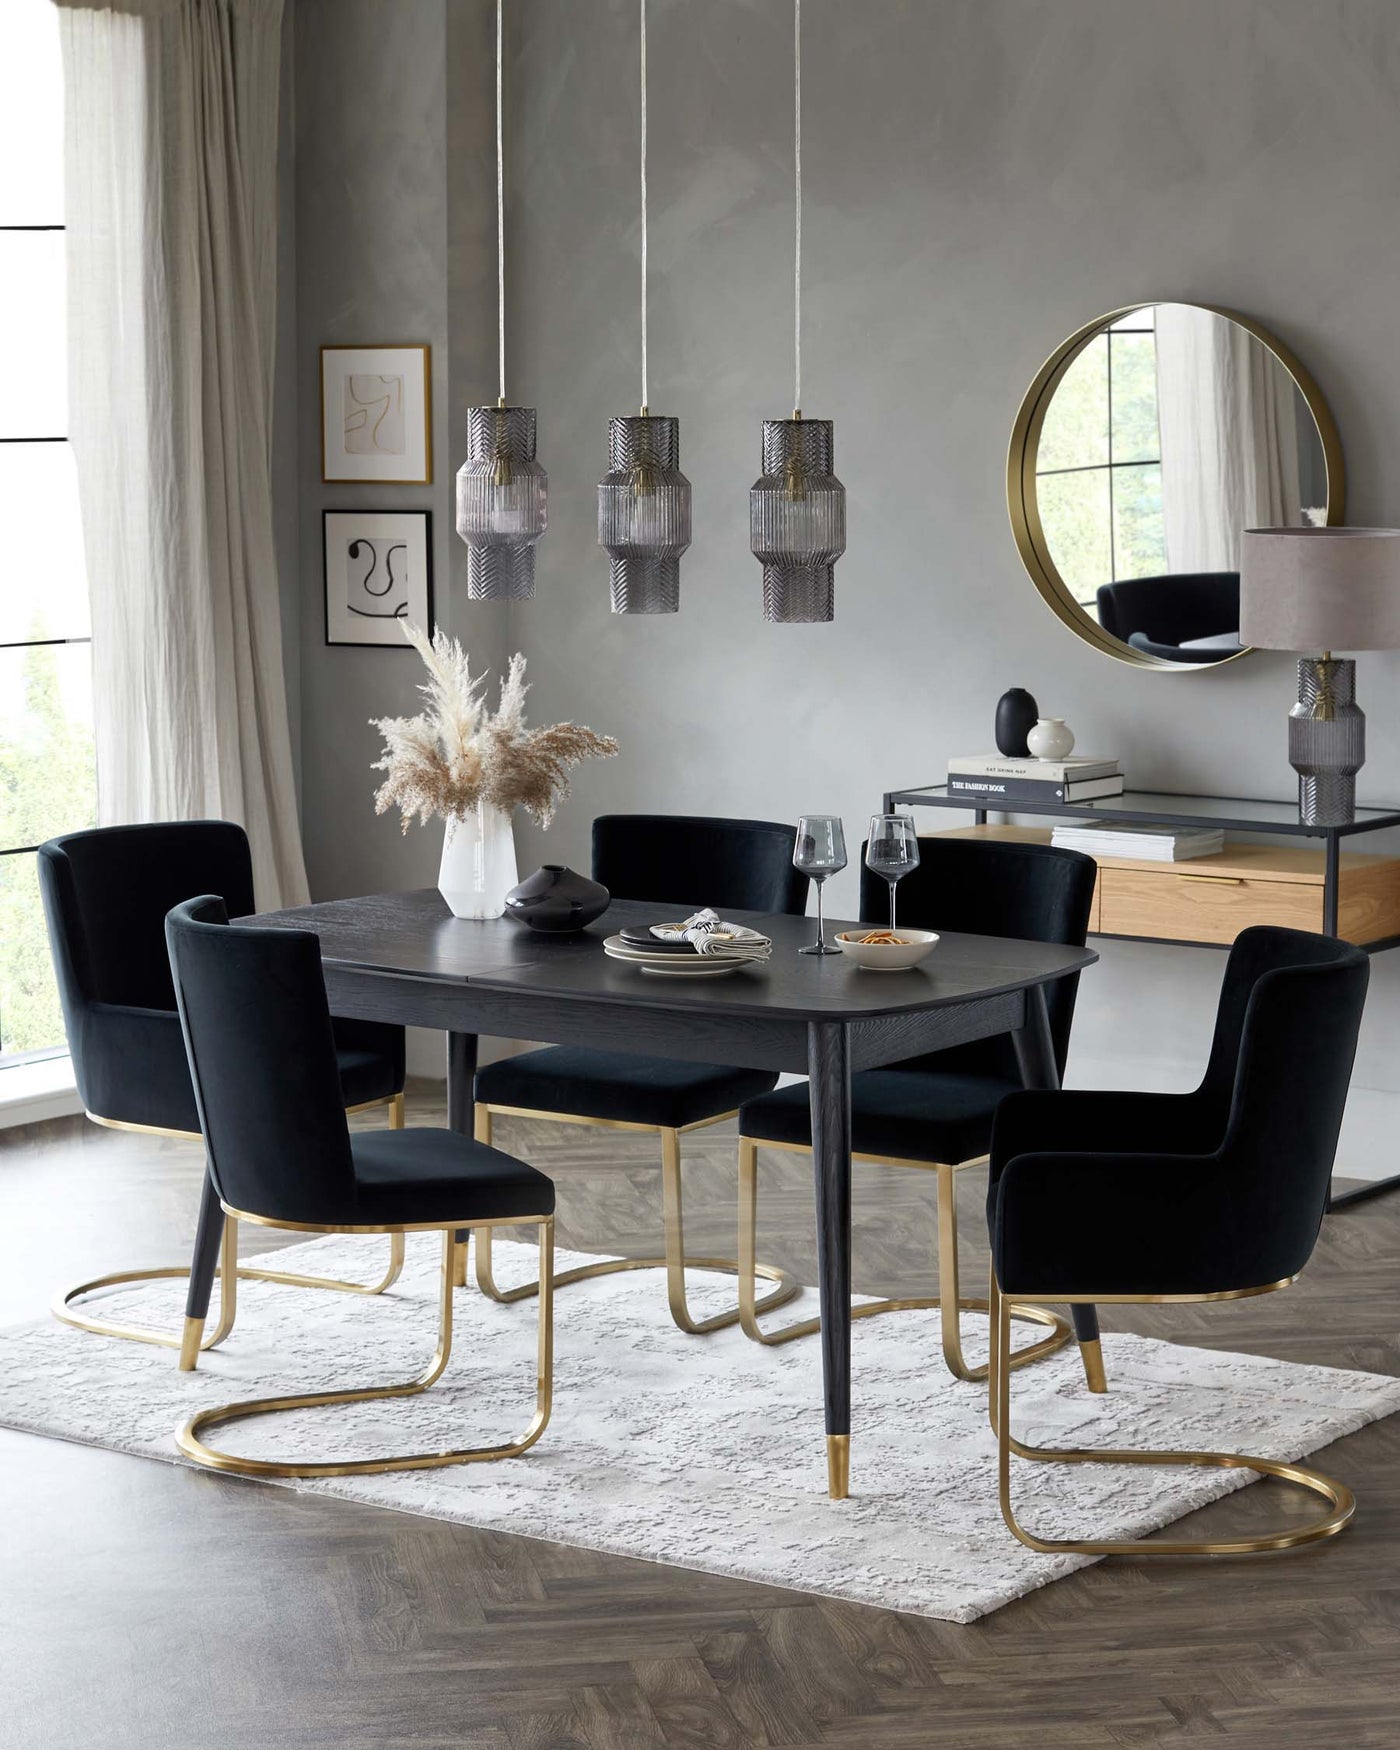 Elegant dining room set featuring a sleek rectangular black table with four plush velvet dining chairs, each with unique gold metal legs. A sideboard with a combination of black and natural wood finishes complements the table, accentuated by a circular gold-framed mirror and a stylish table lamp. A neutral-toned area rug underlines the set, and modern glass pendant lights add a sophisticated touch overhead.